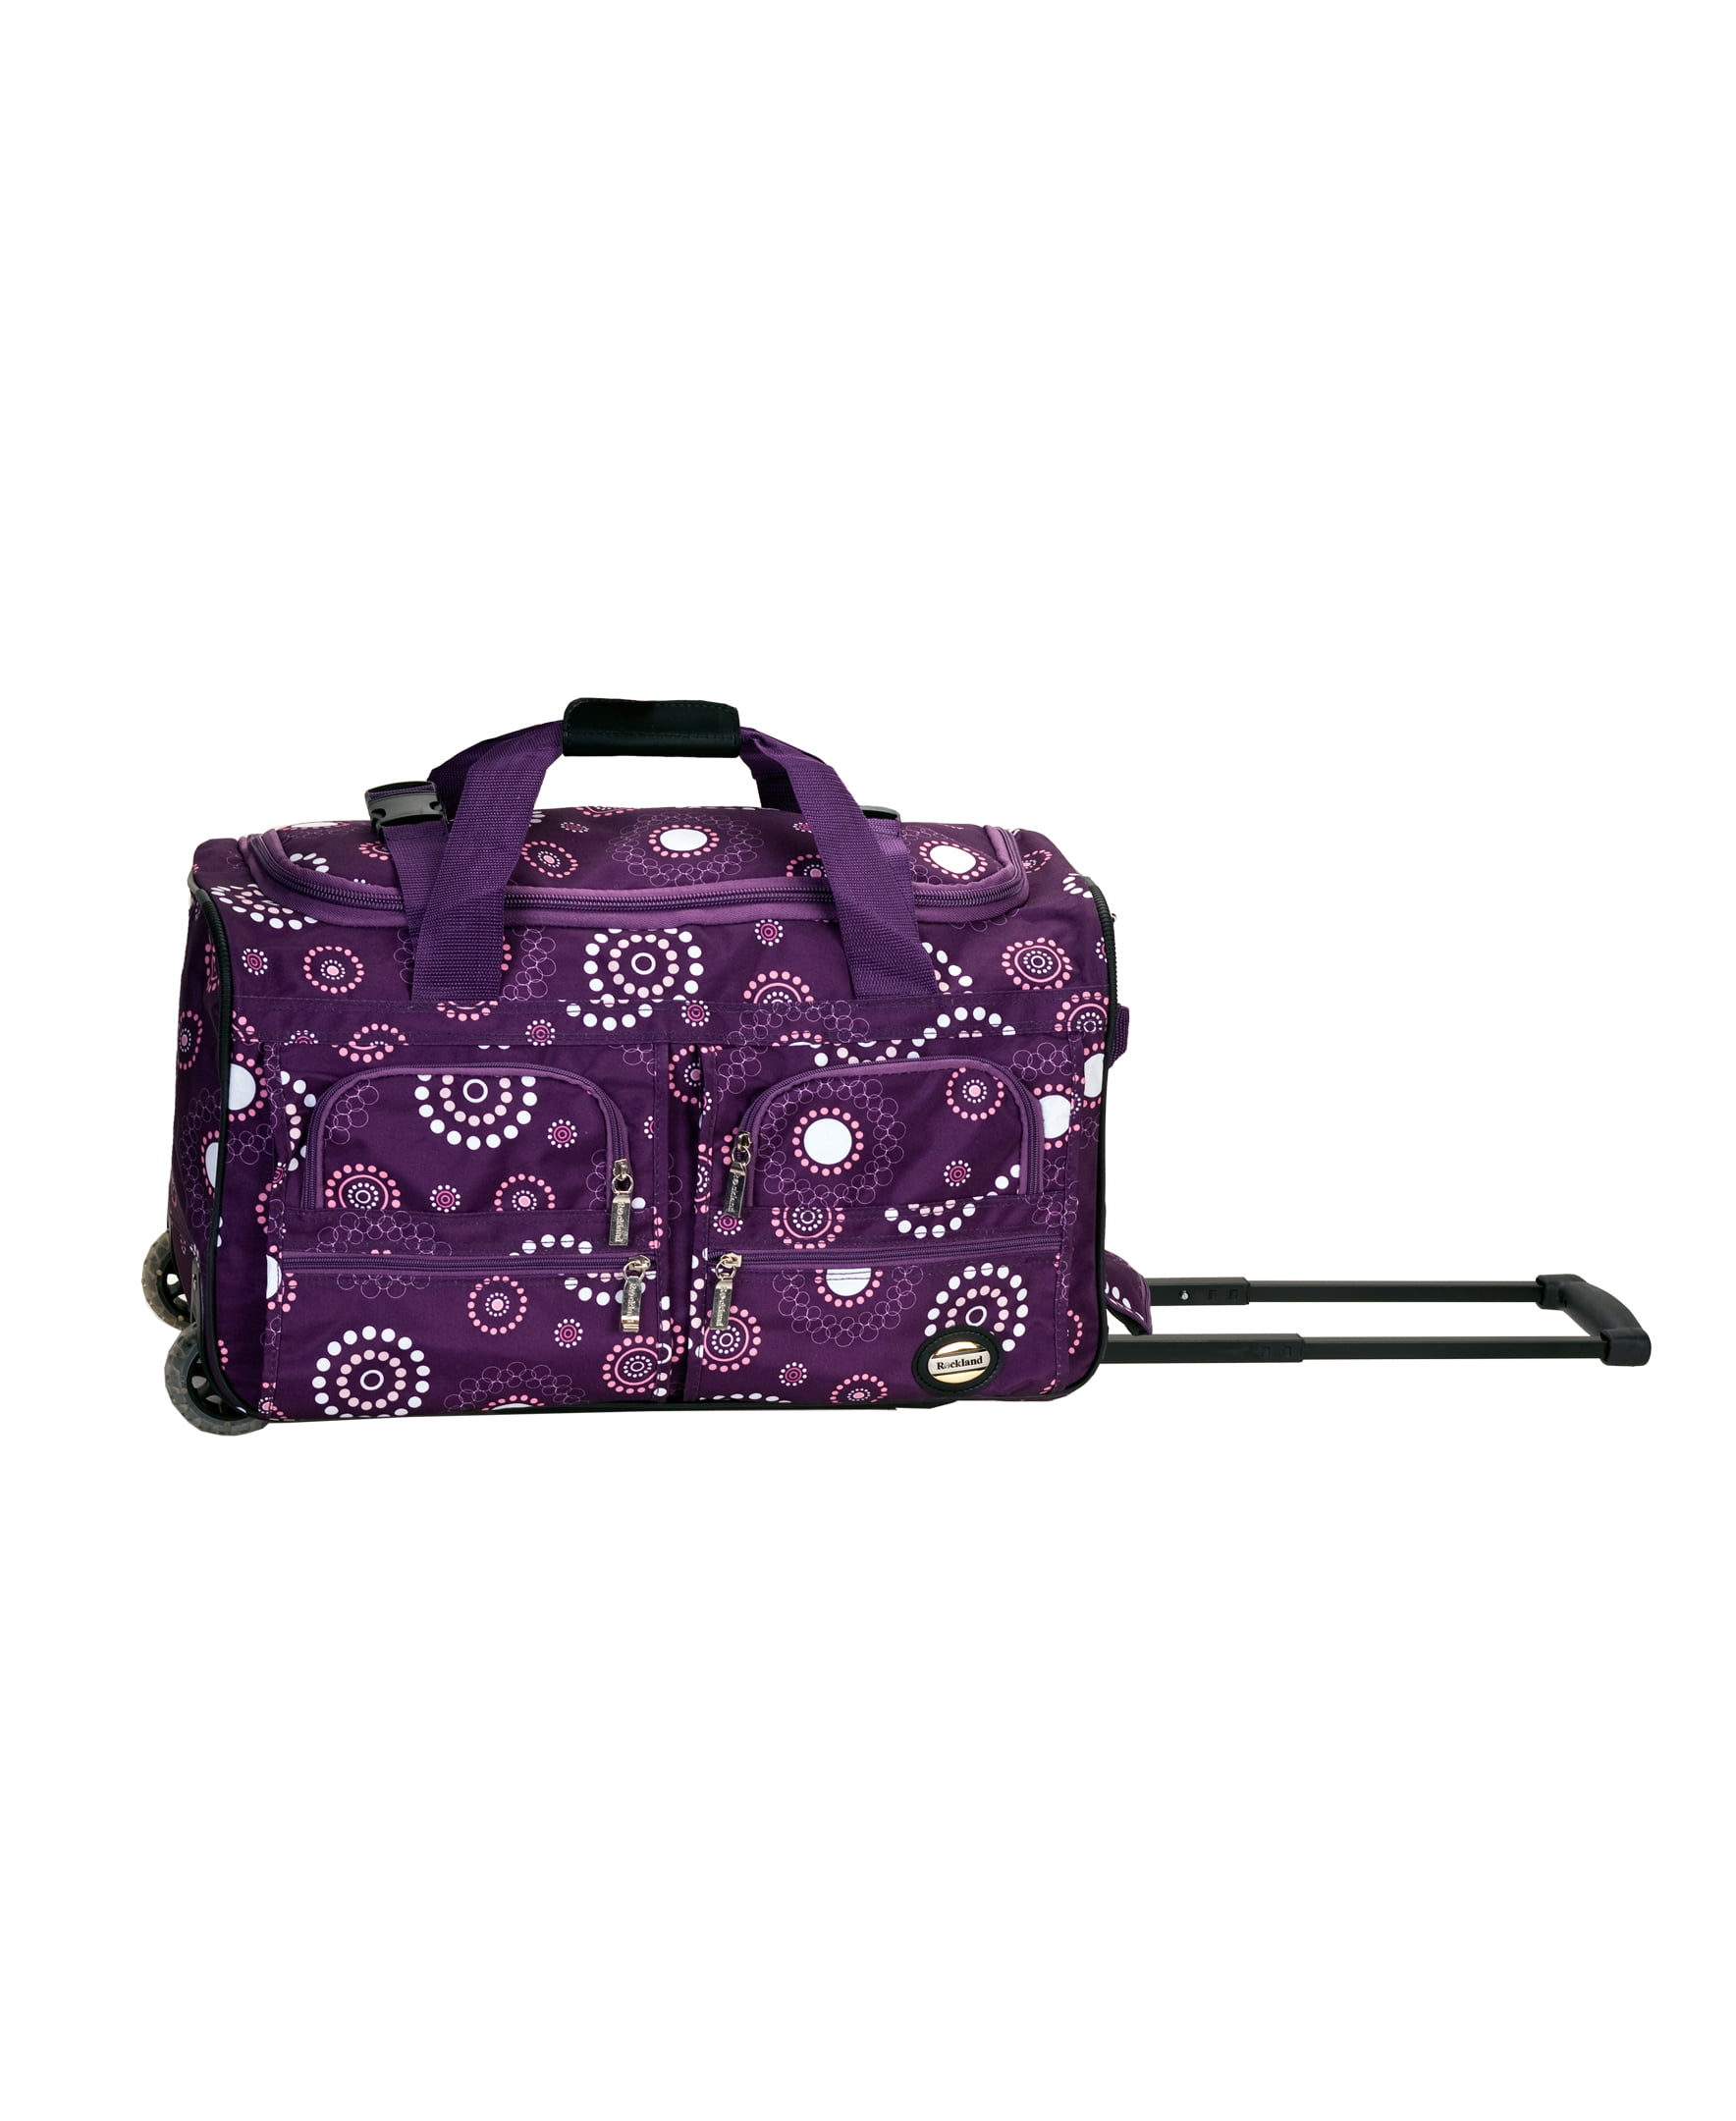 Rockland Luggage Rolling 22 Inch Duffle Bag One Size Purple Pearl 